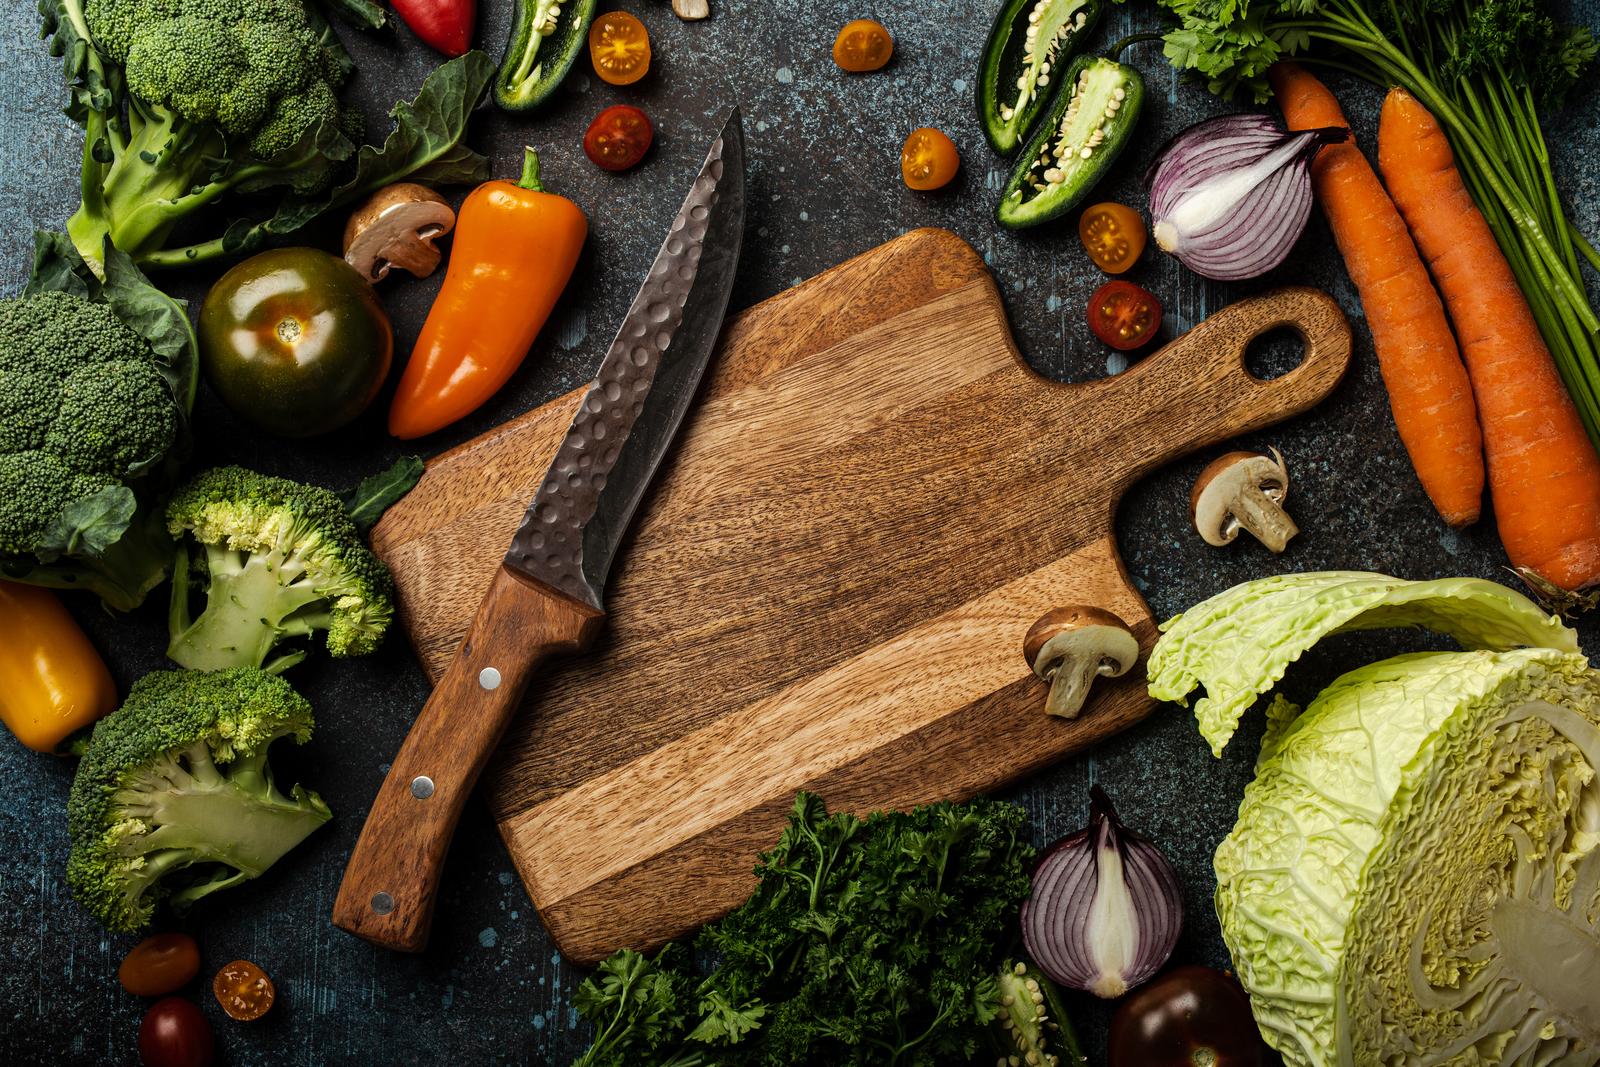 The Best Non Toxic Cutting Boards - Safe and Healthy Options for